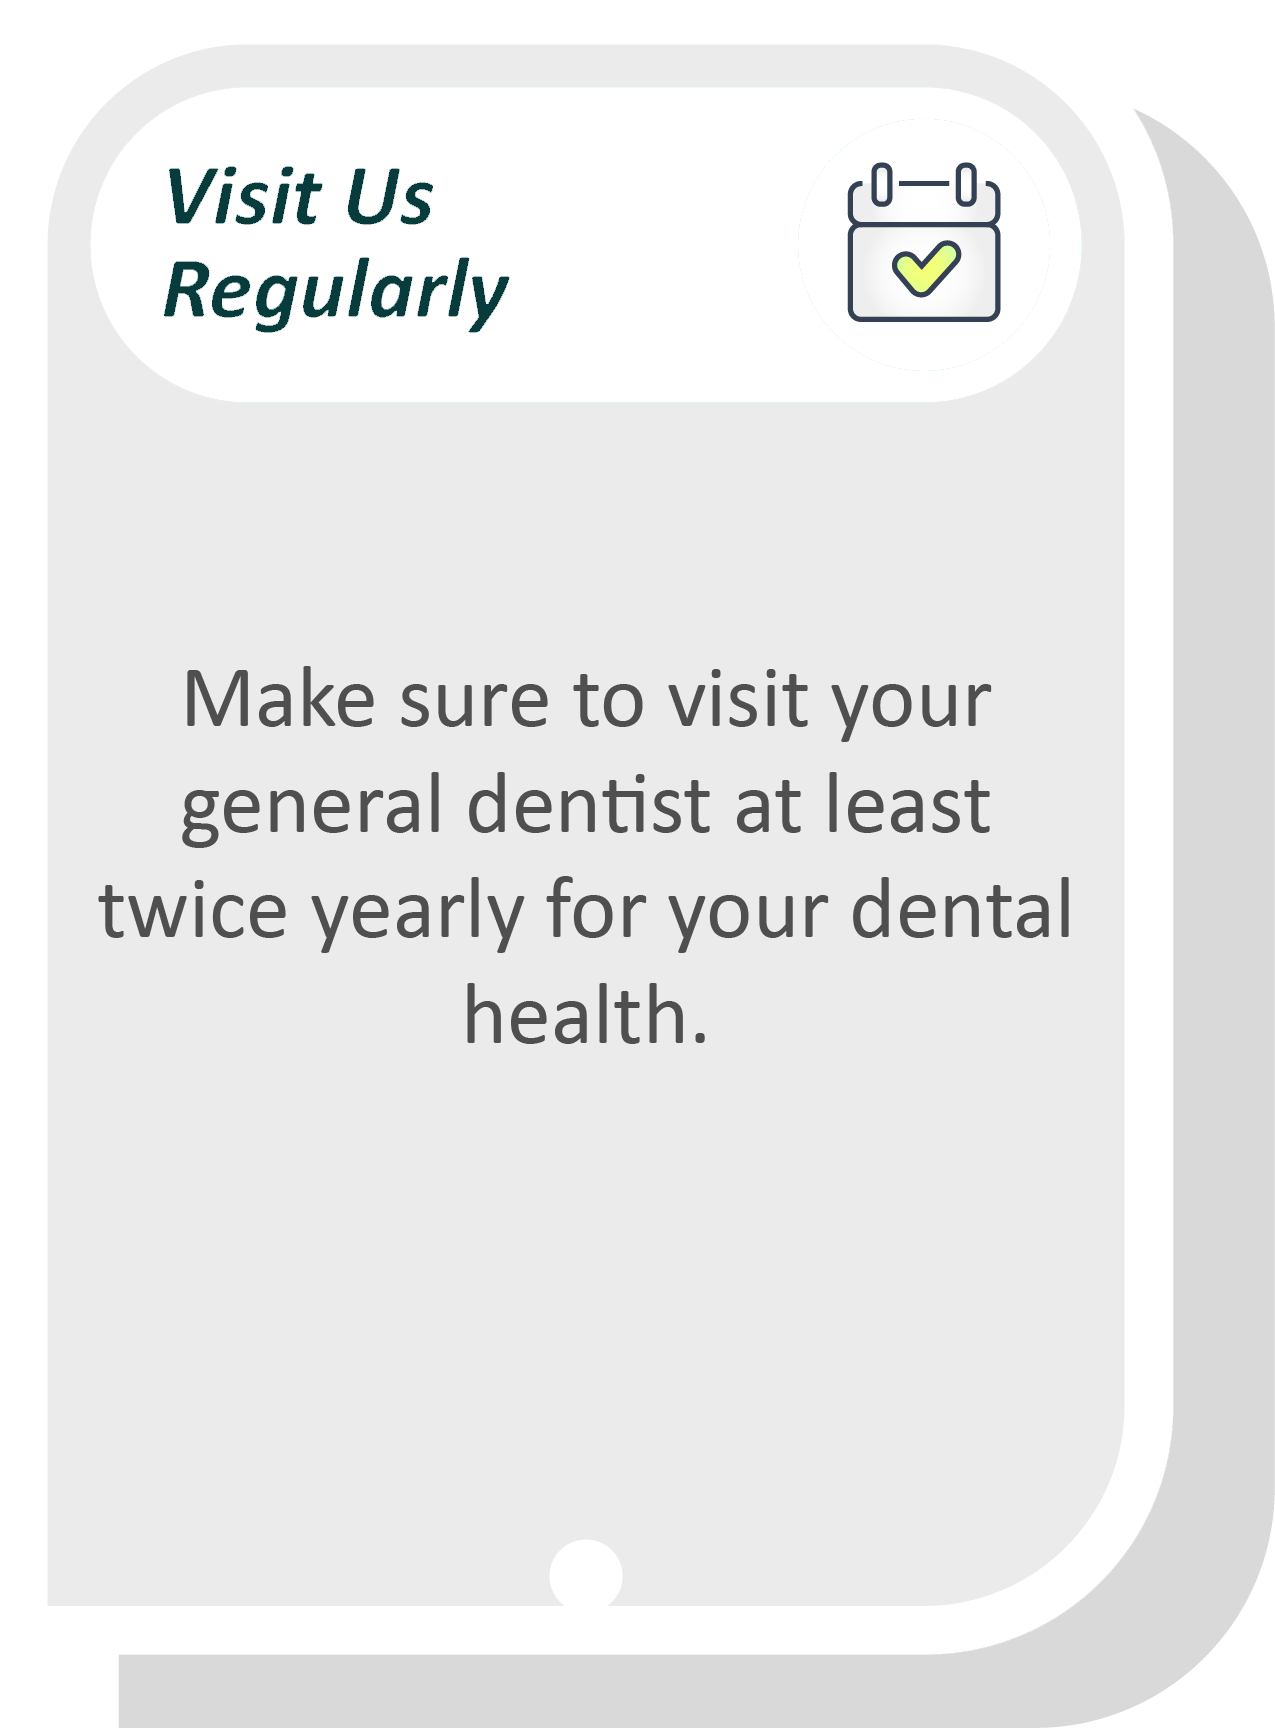 General dentist infographic: Make sure to visit your general dentist at least twice yearly for your dental health.